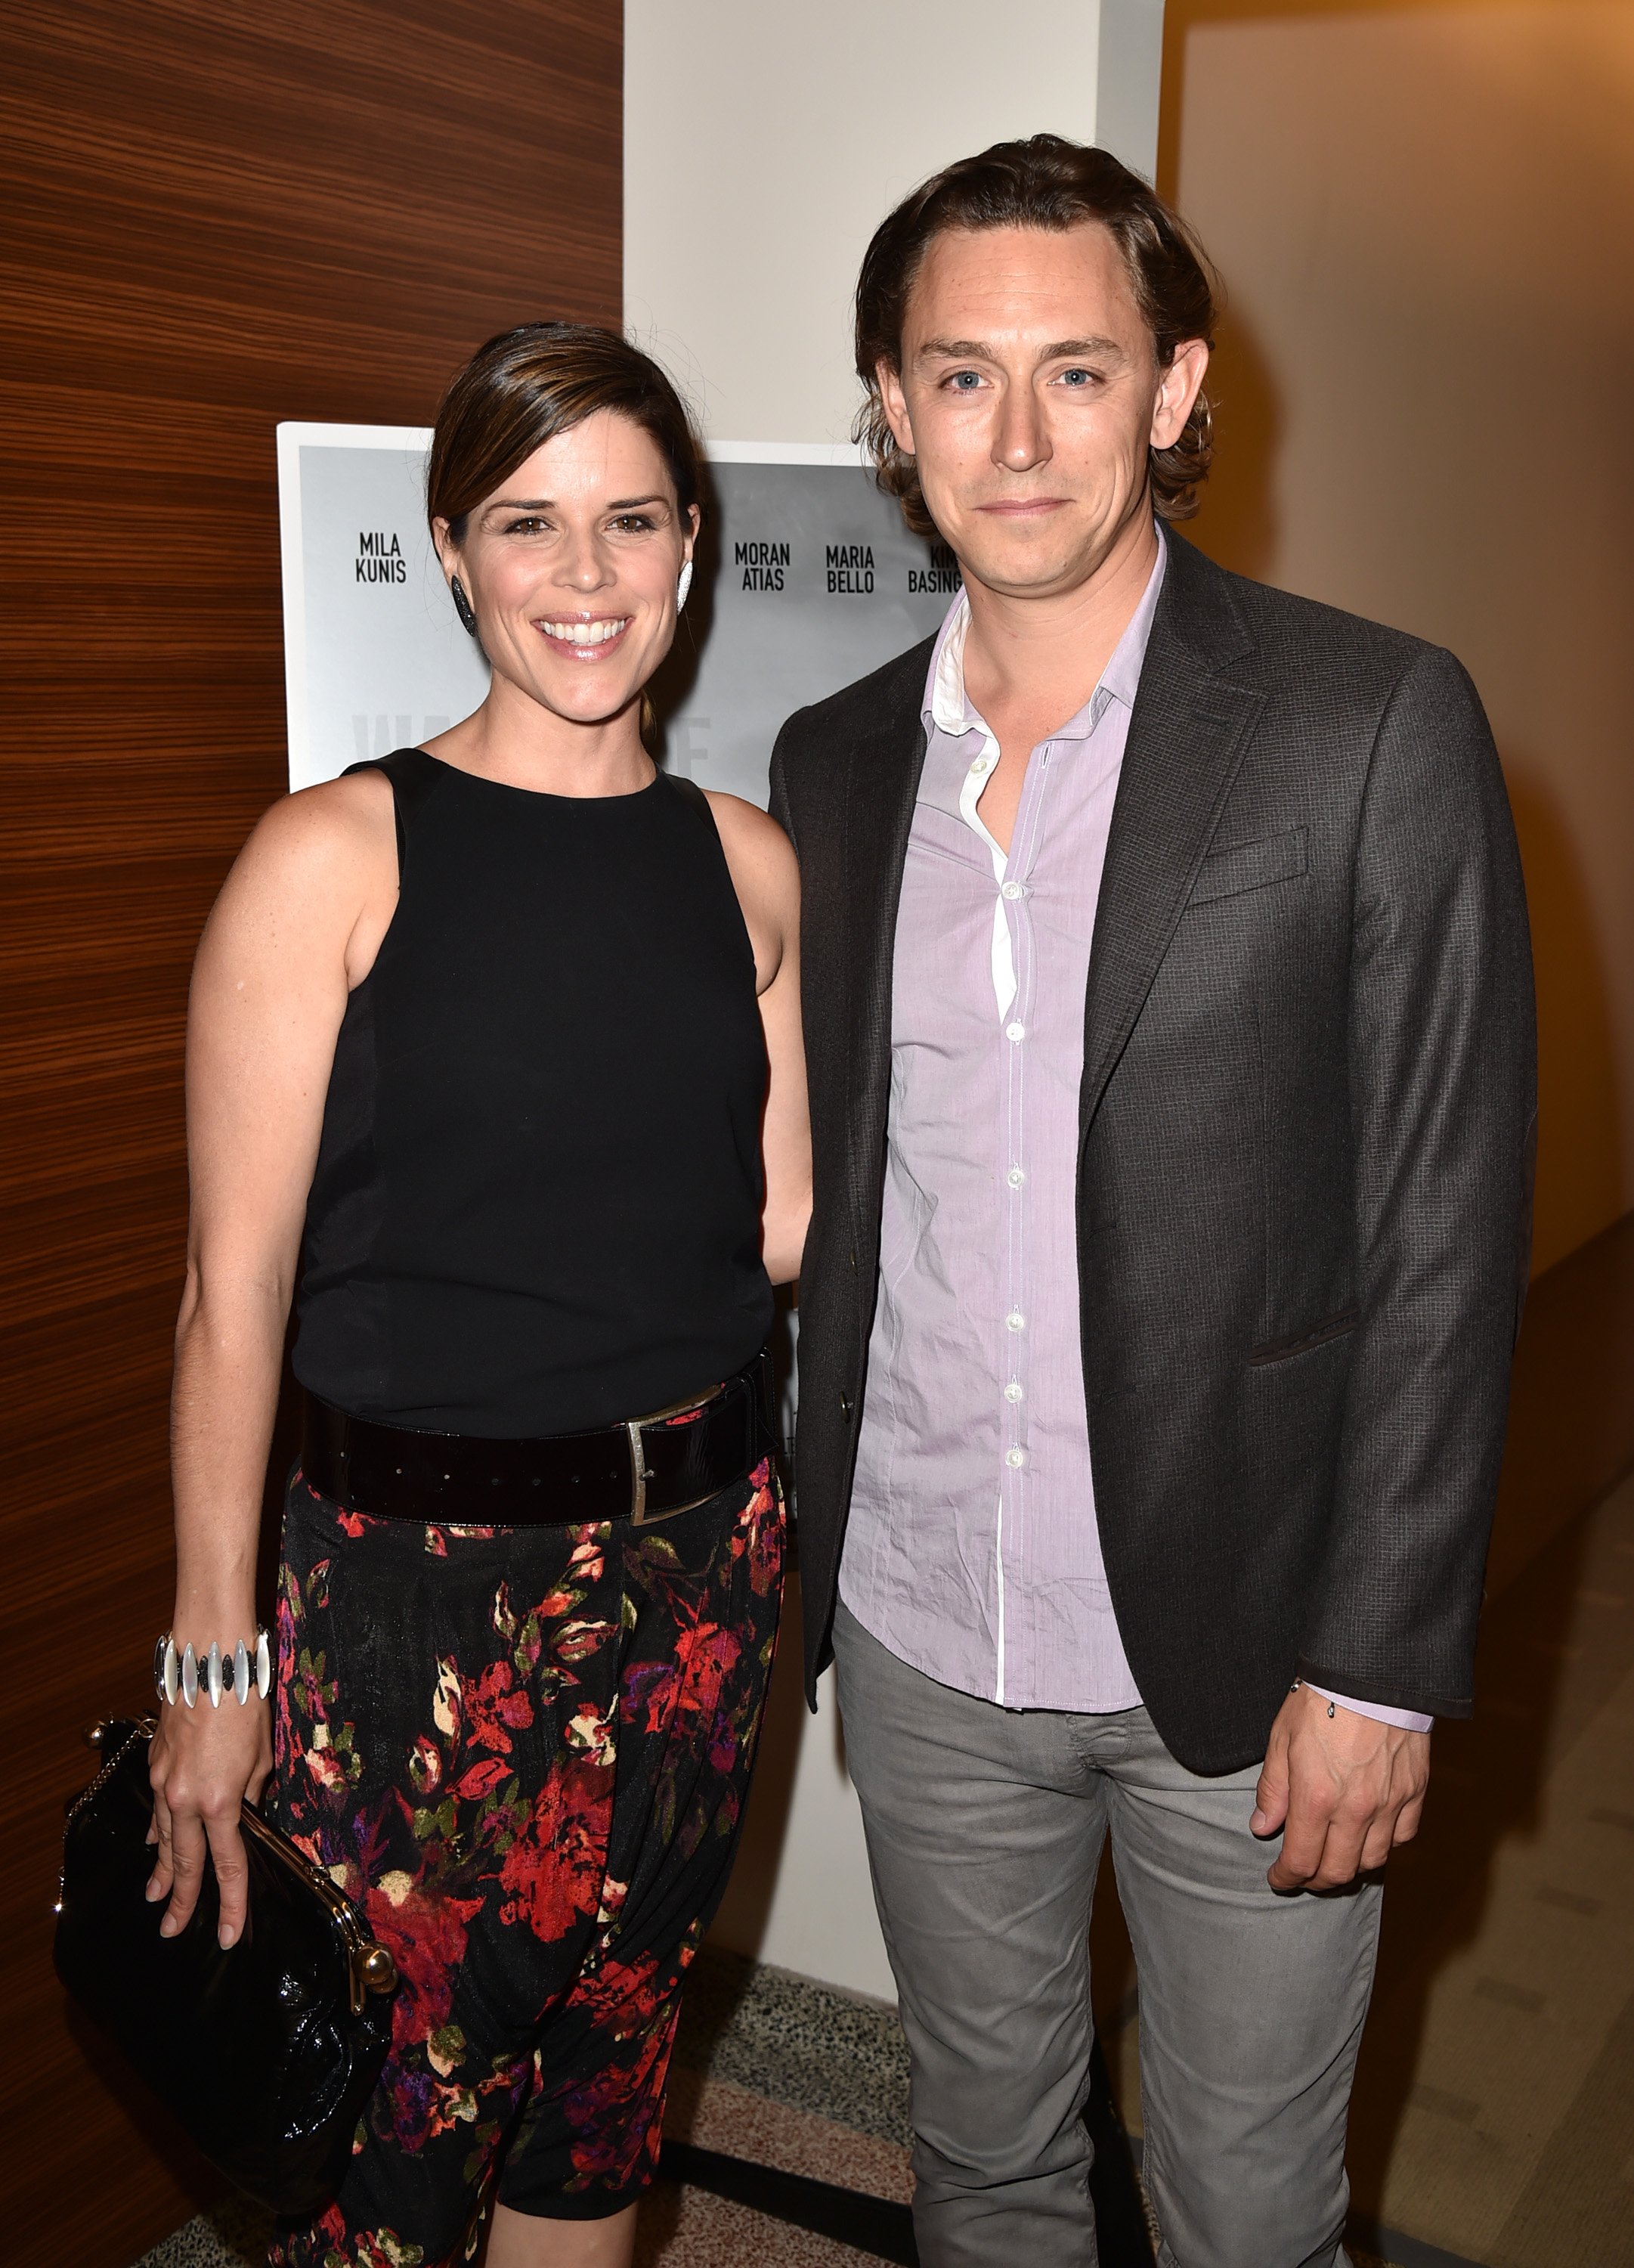 Neve Campbell and JJ Feild attend the Sony Picture Classics premiere "Third Person" at Linwood Dunn Theater on June 9, 2014, in Hollywood, California. | Source: Getty Images